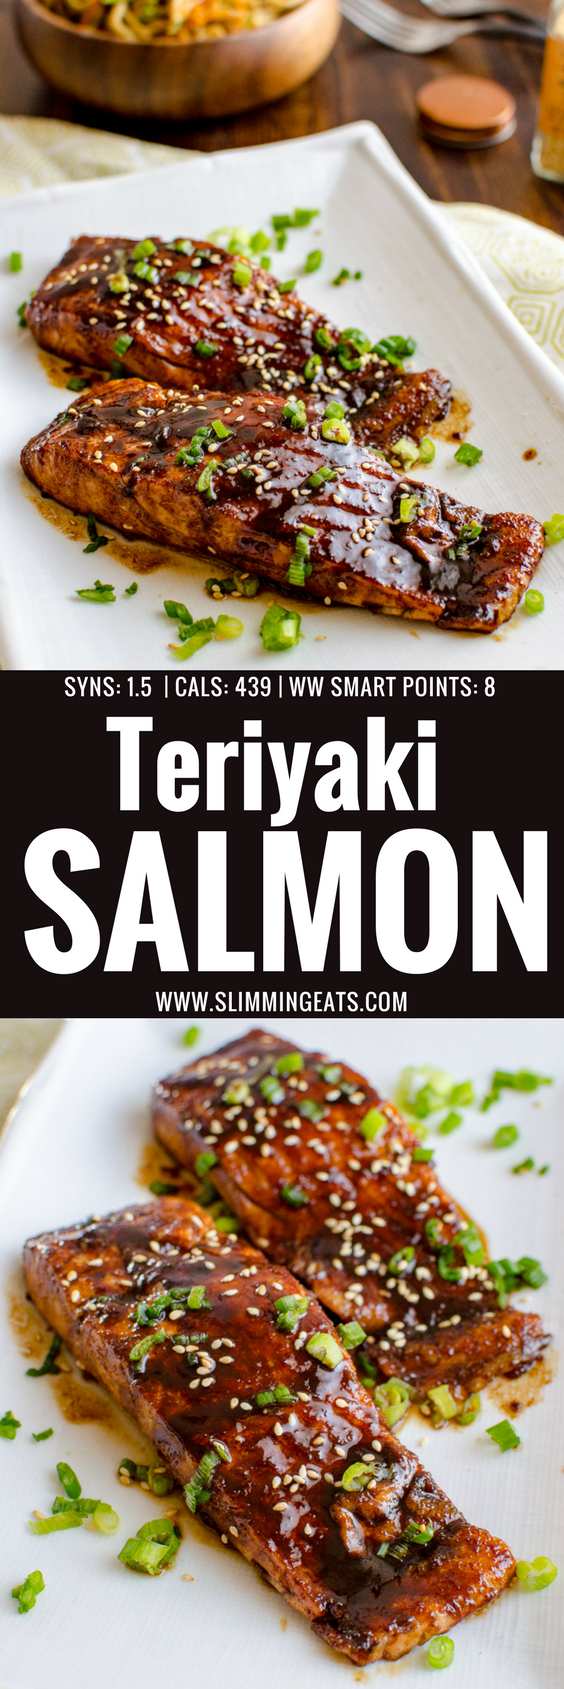 Love Salmon? This Teriyaki Salmon with Noodles is a simple low syn delicious dish that the whole family will enjoy. Dairy Free, Slimming World and Weight Watchers friendly | www.slimmingeats.com